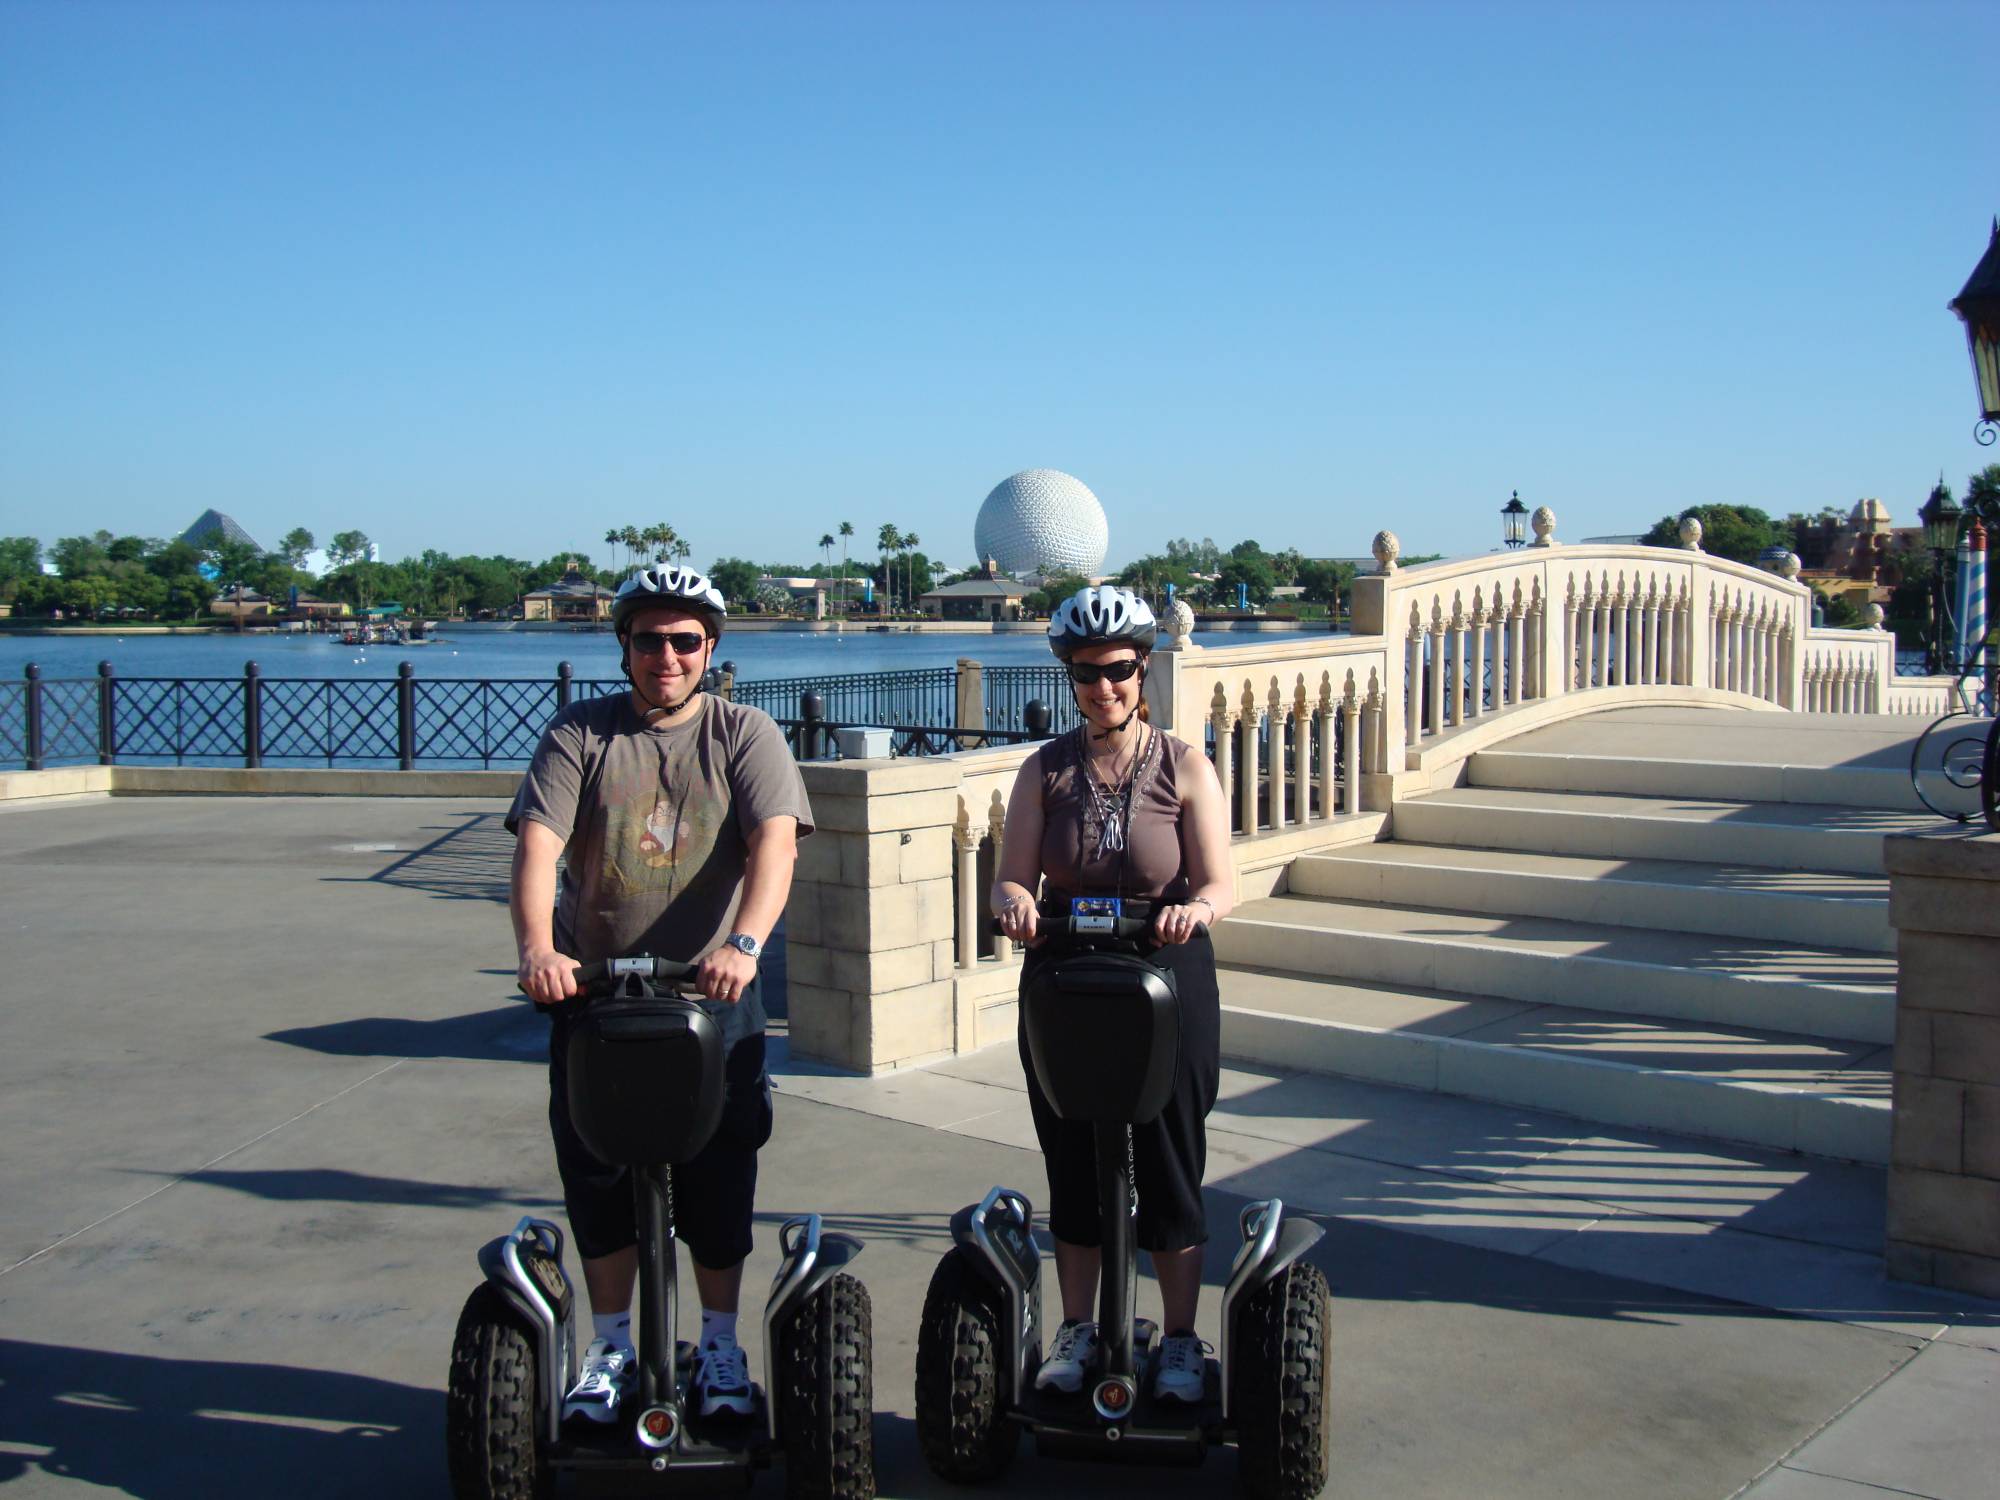 Learn more about Nature Inspired design at Epcot on a Segway |PassPorter.com